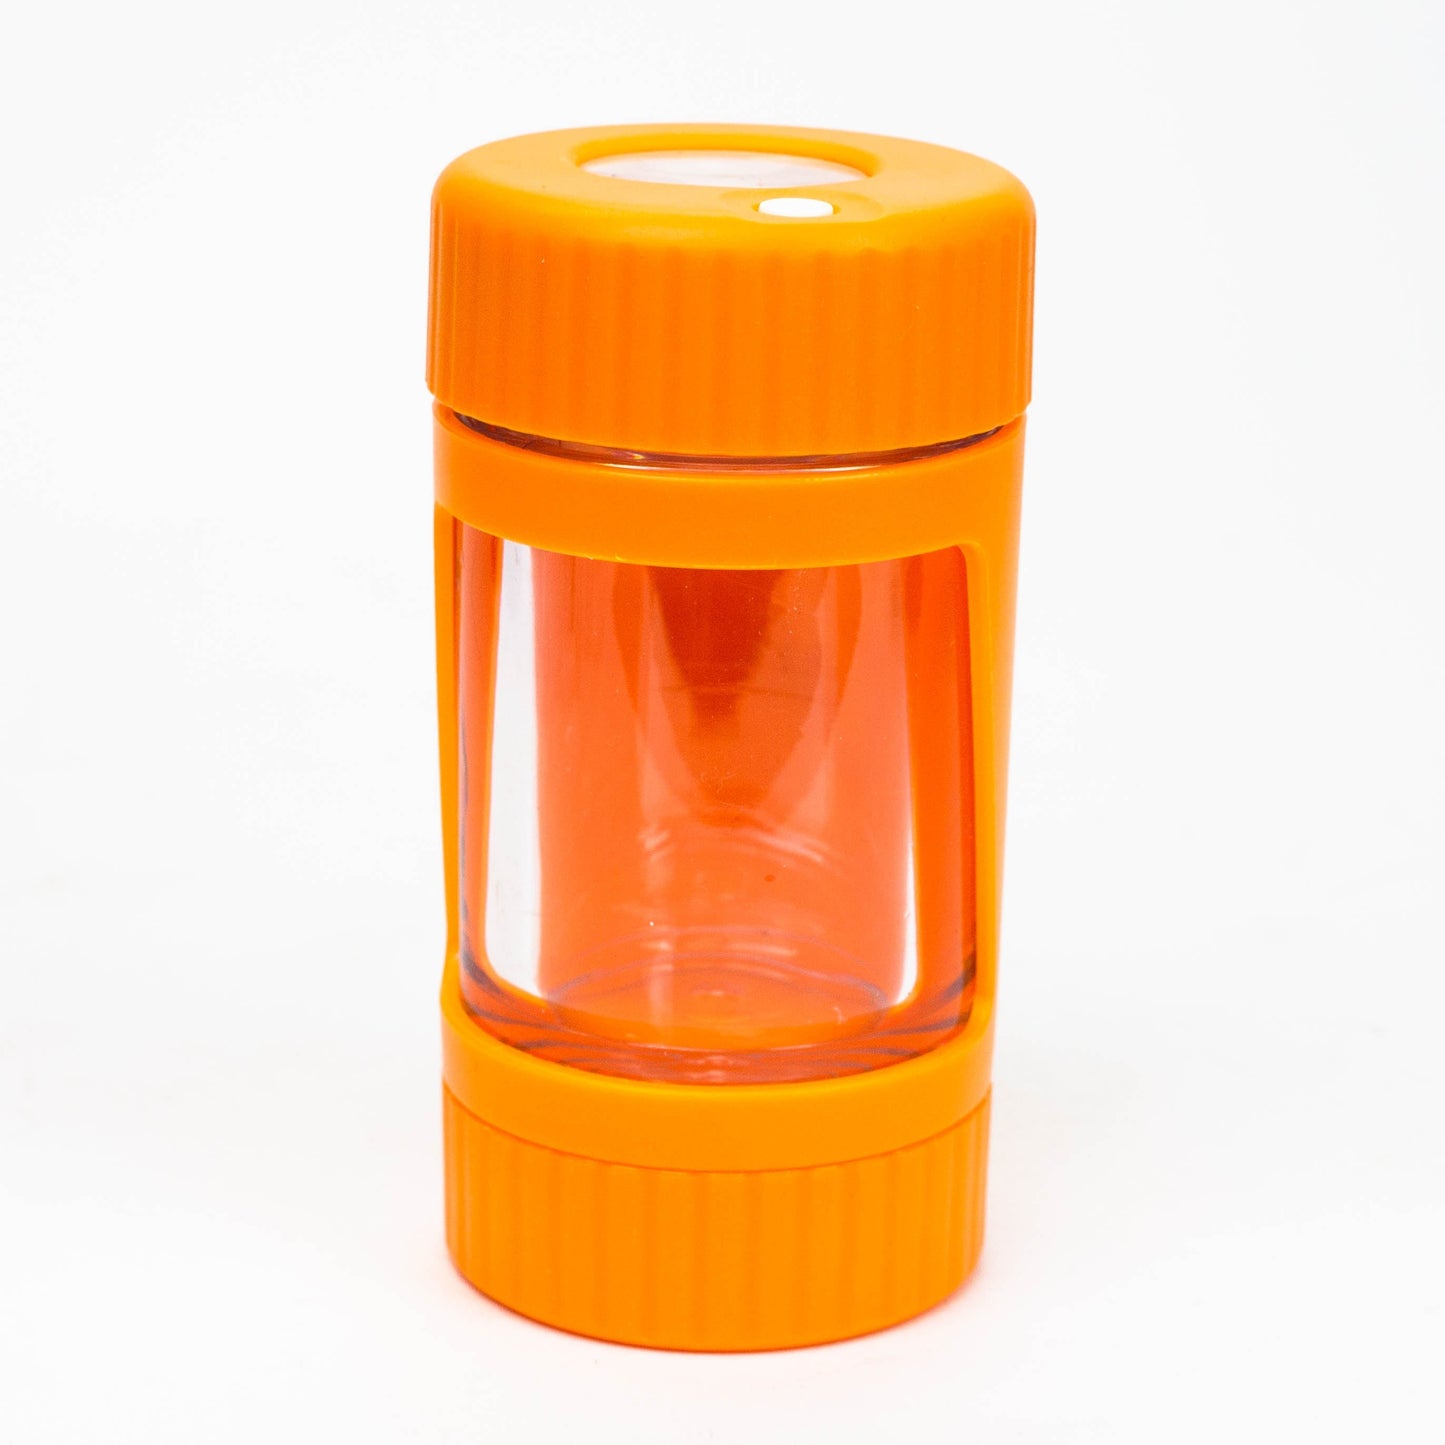 4-in-1 Magnify Led Jar with a grinder and one hitter Smoke Drop Orange 